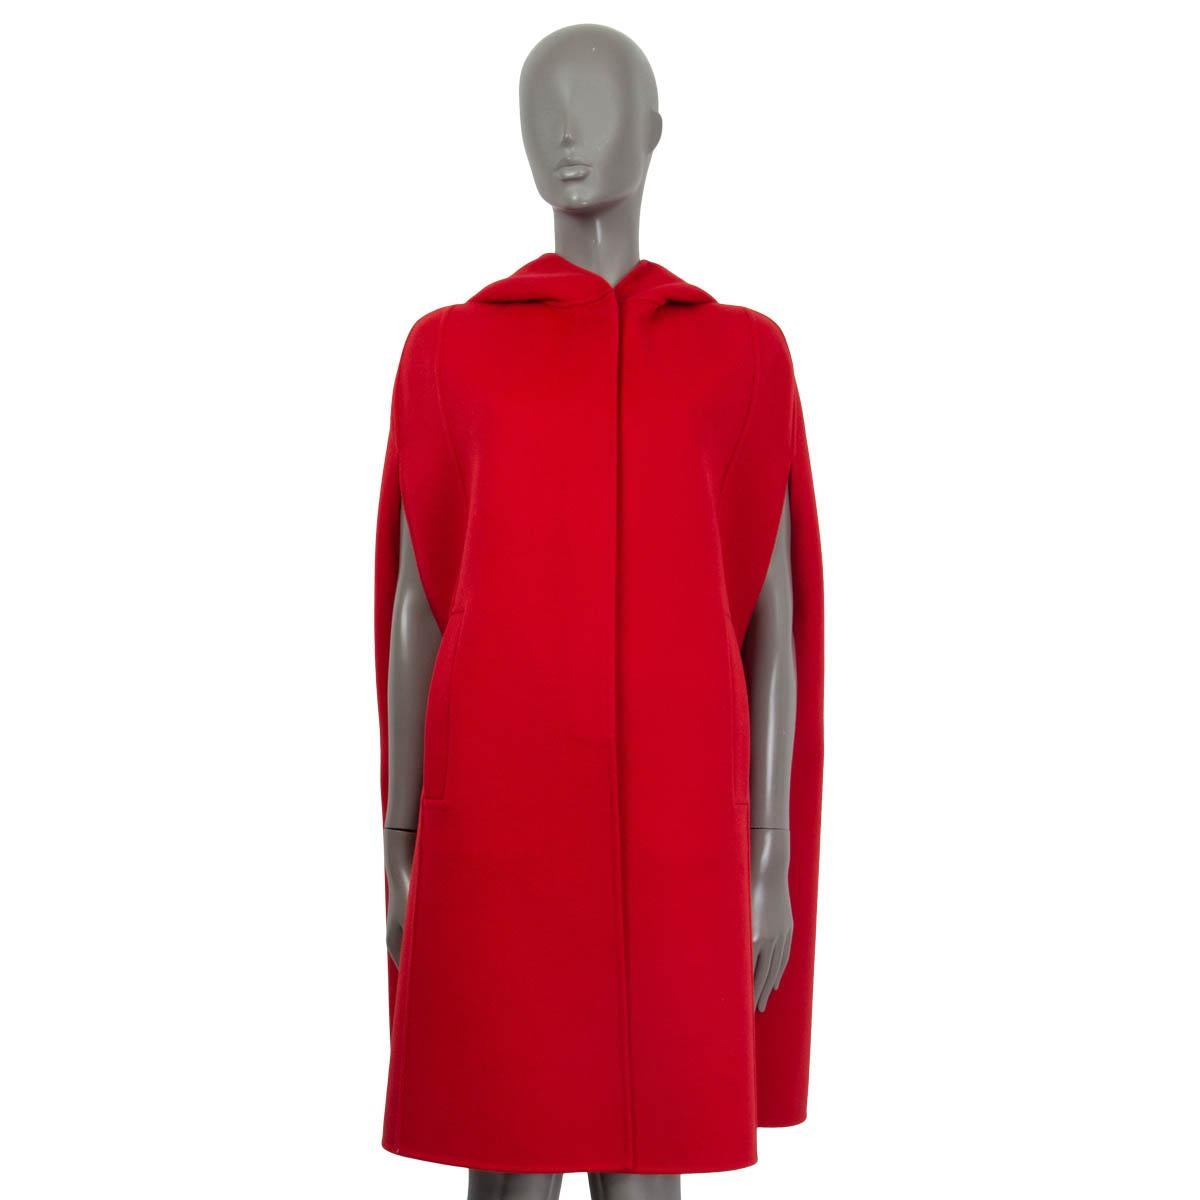 CHRISTIAN DIOR rot Wolle 2021 DOUBLE FACE HOODED Cape Jacke 38 S (Rot) im Angebot